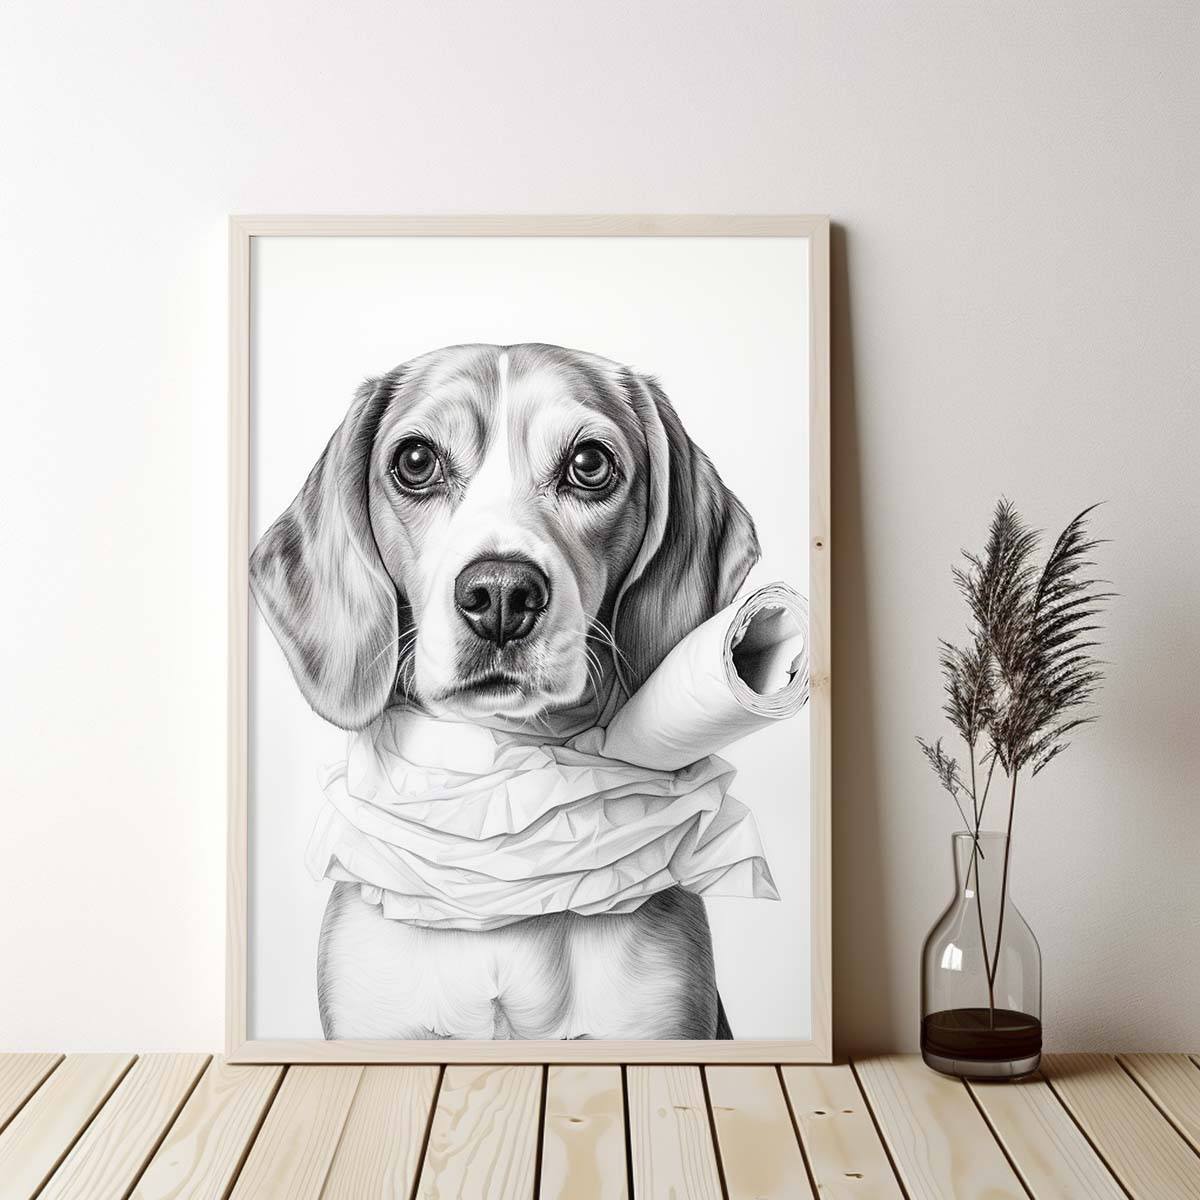 Beagle With Toilet Paper Canvas Art, Beagle With Toilet Paper, Funny Dog Art, Bathroom Wall Decor, Home Decor, Bathroom Wall Art, Dog Wall Decor, Animal Decor, Pet Gift